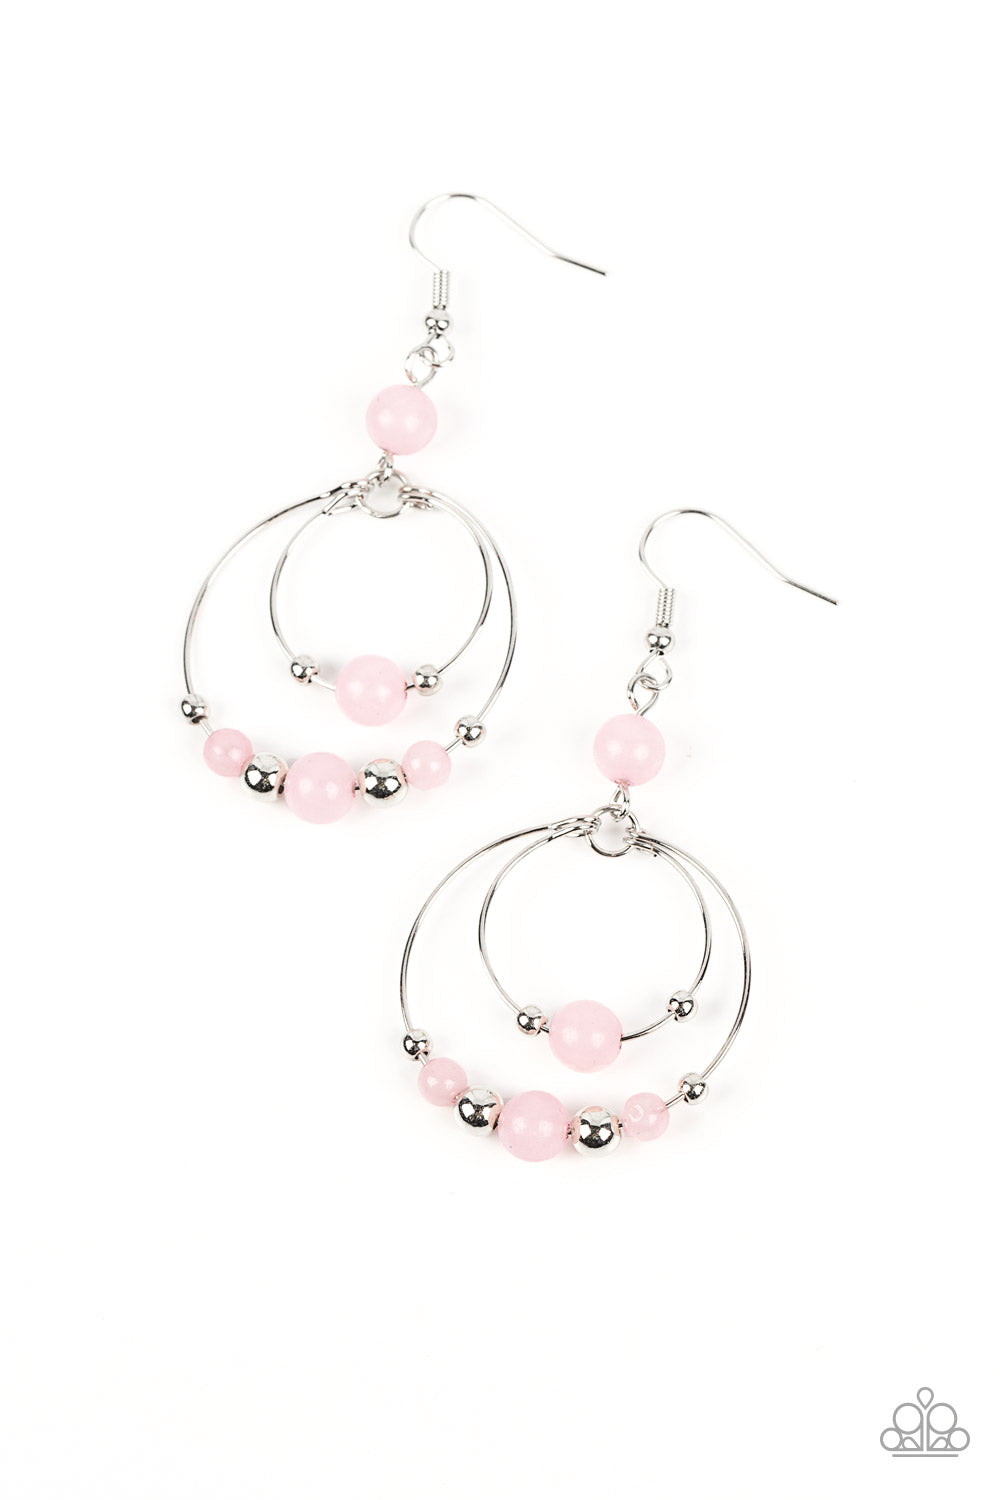 Paparazzi Accessories - Eco Eden - Pink Pearl Earrings